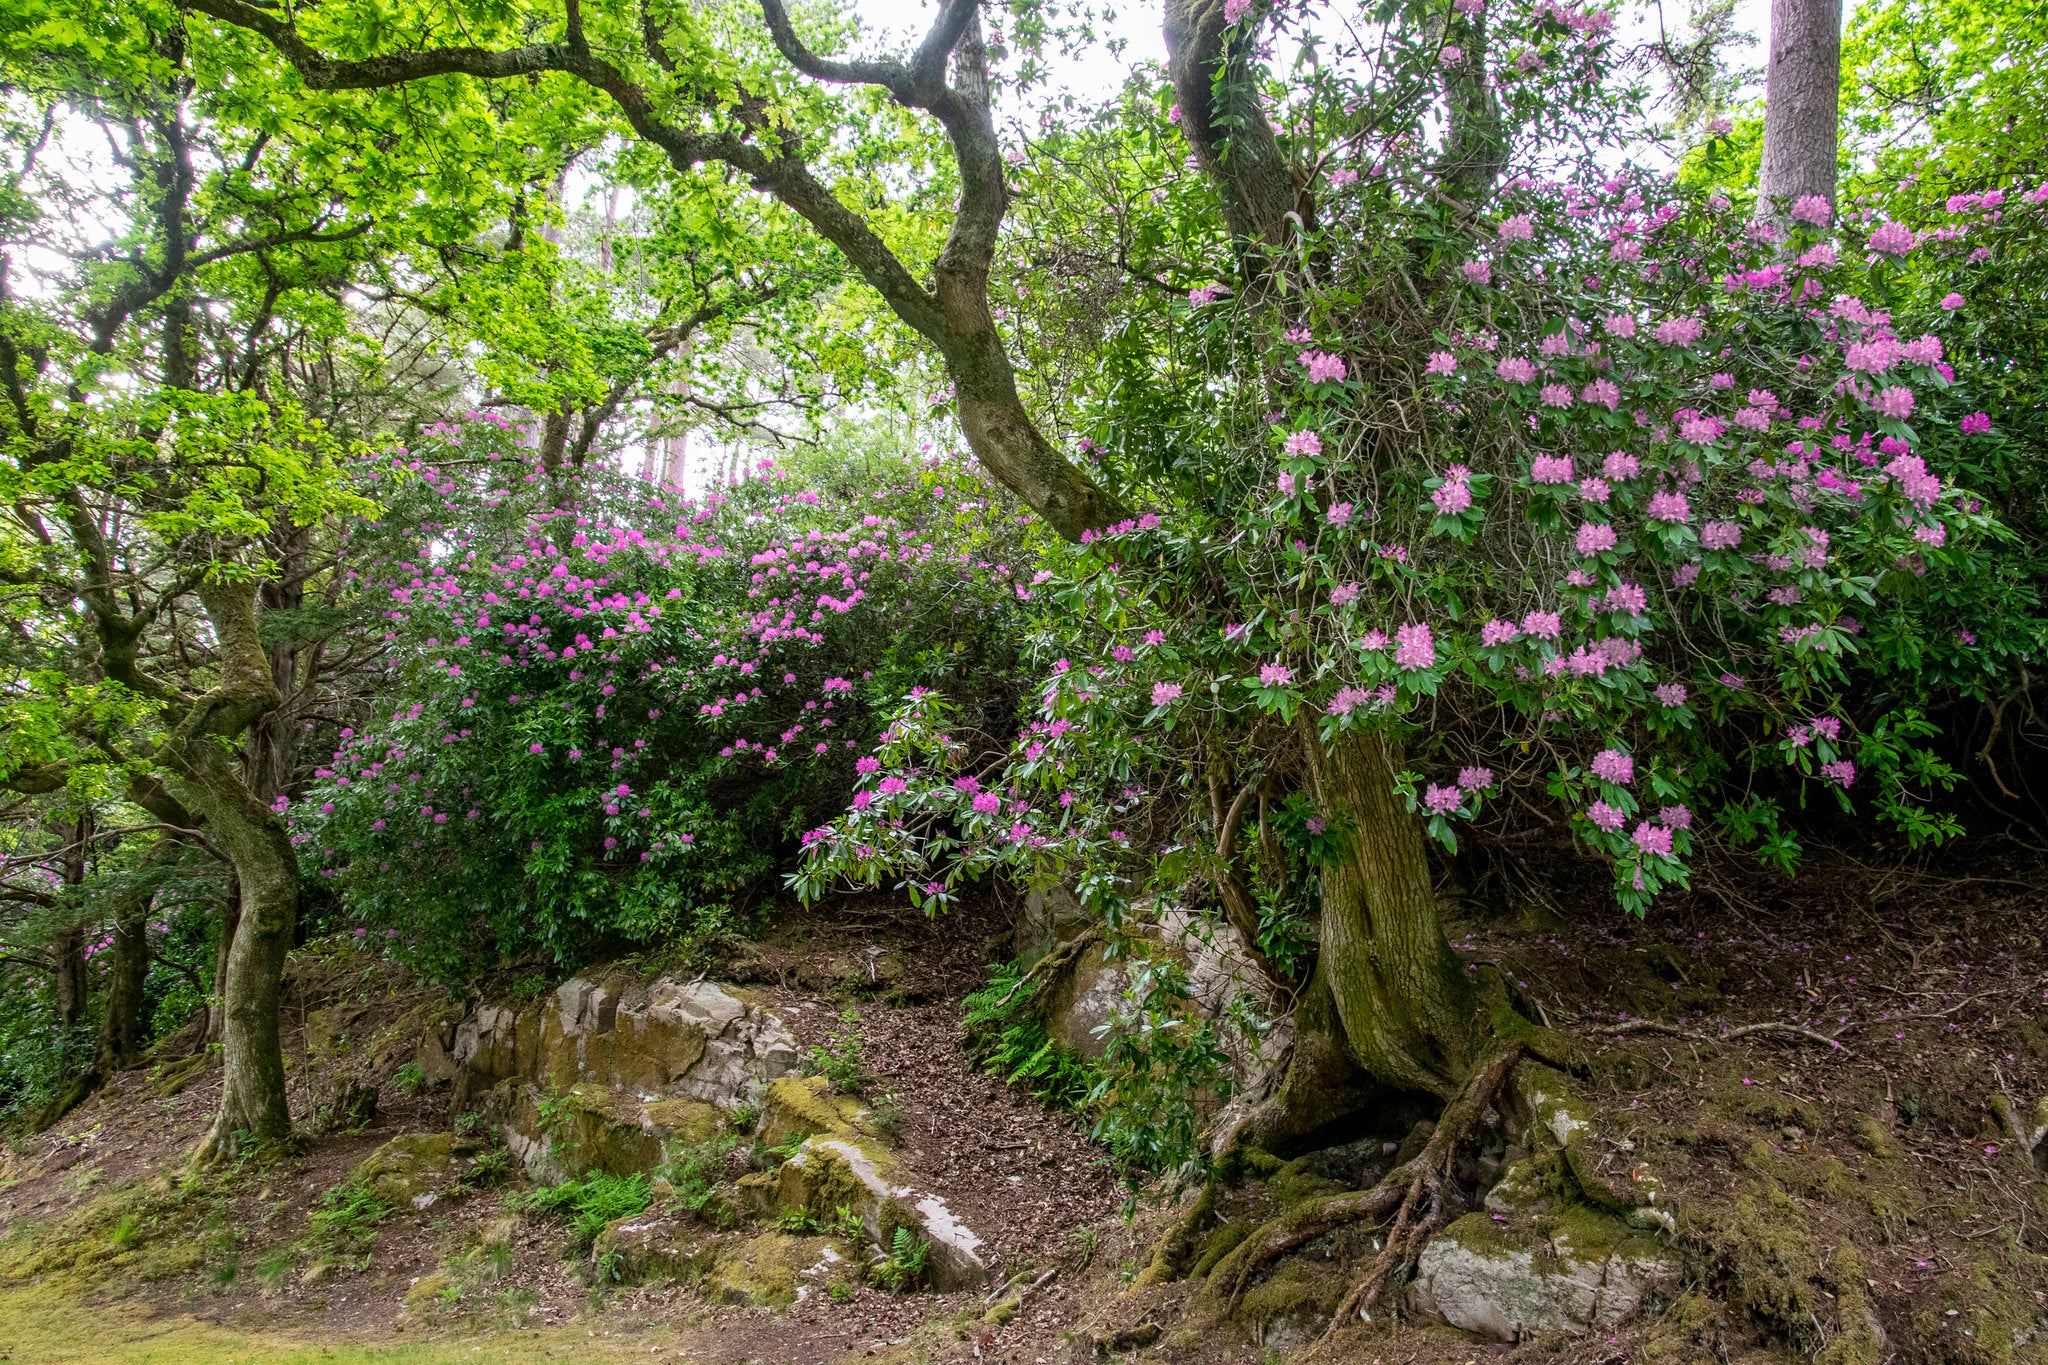 Rhododendron ponticum, an invasive species which gardeners are being urged not to buy as conservationists warn it can spread tree diseases and harm native wildlife